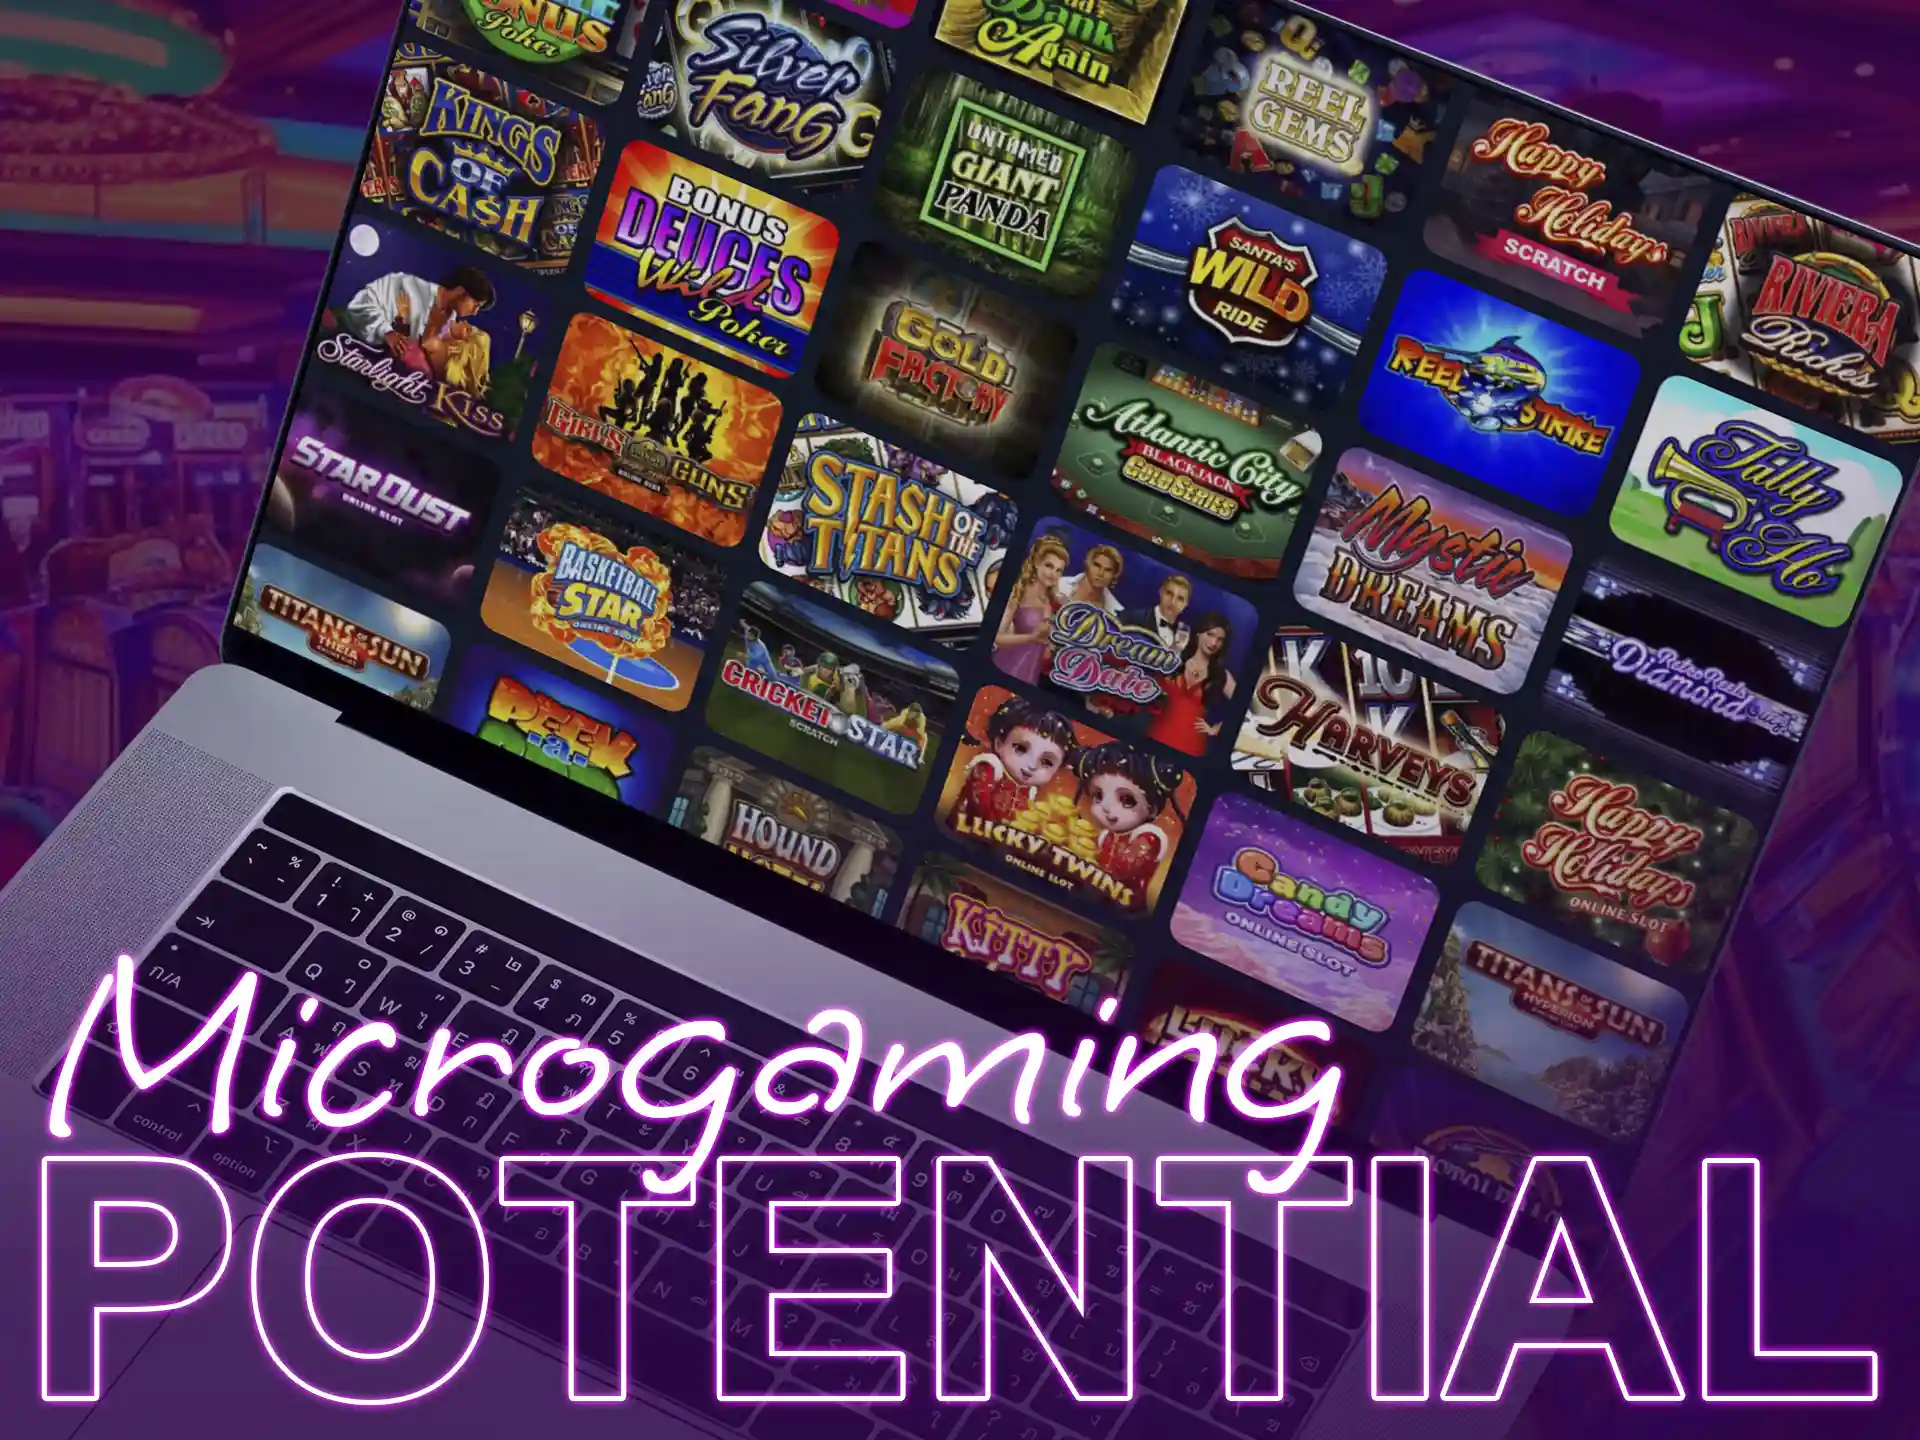 Every Microgaming game has a high winning potential.